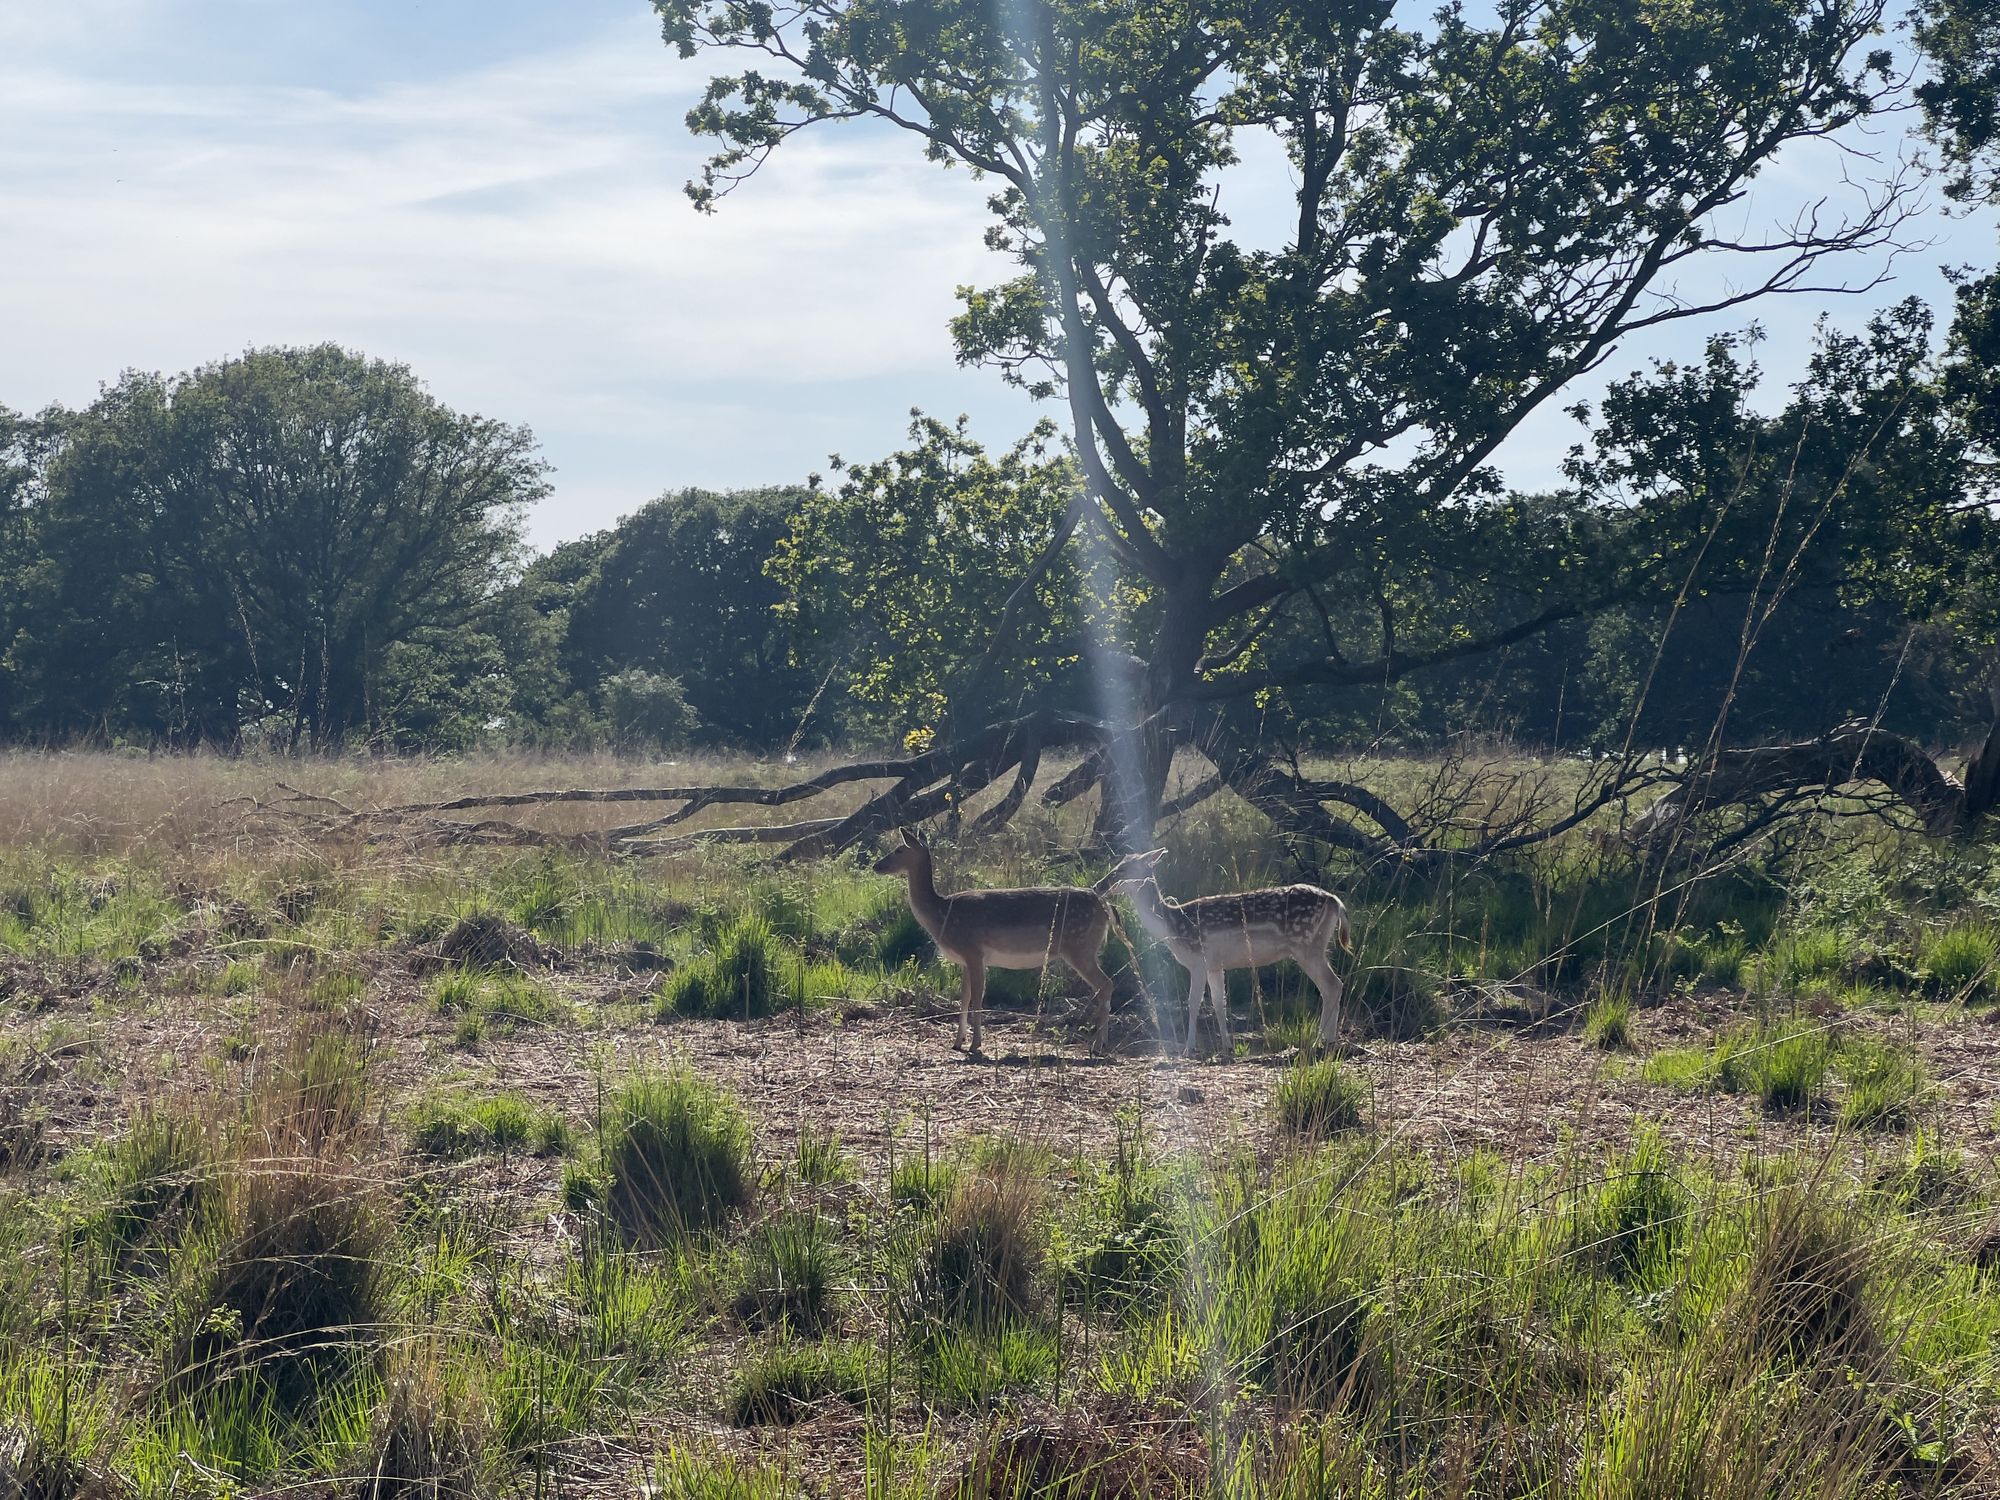 Two fallow deer stand in the scrub with grass and partly-fallen trees around them.